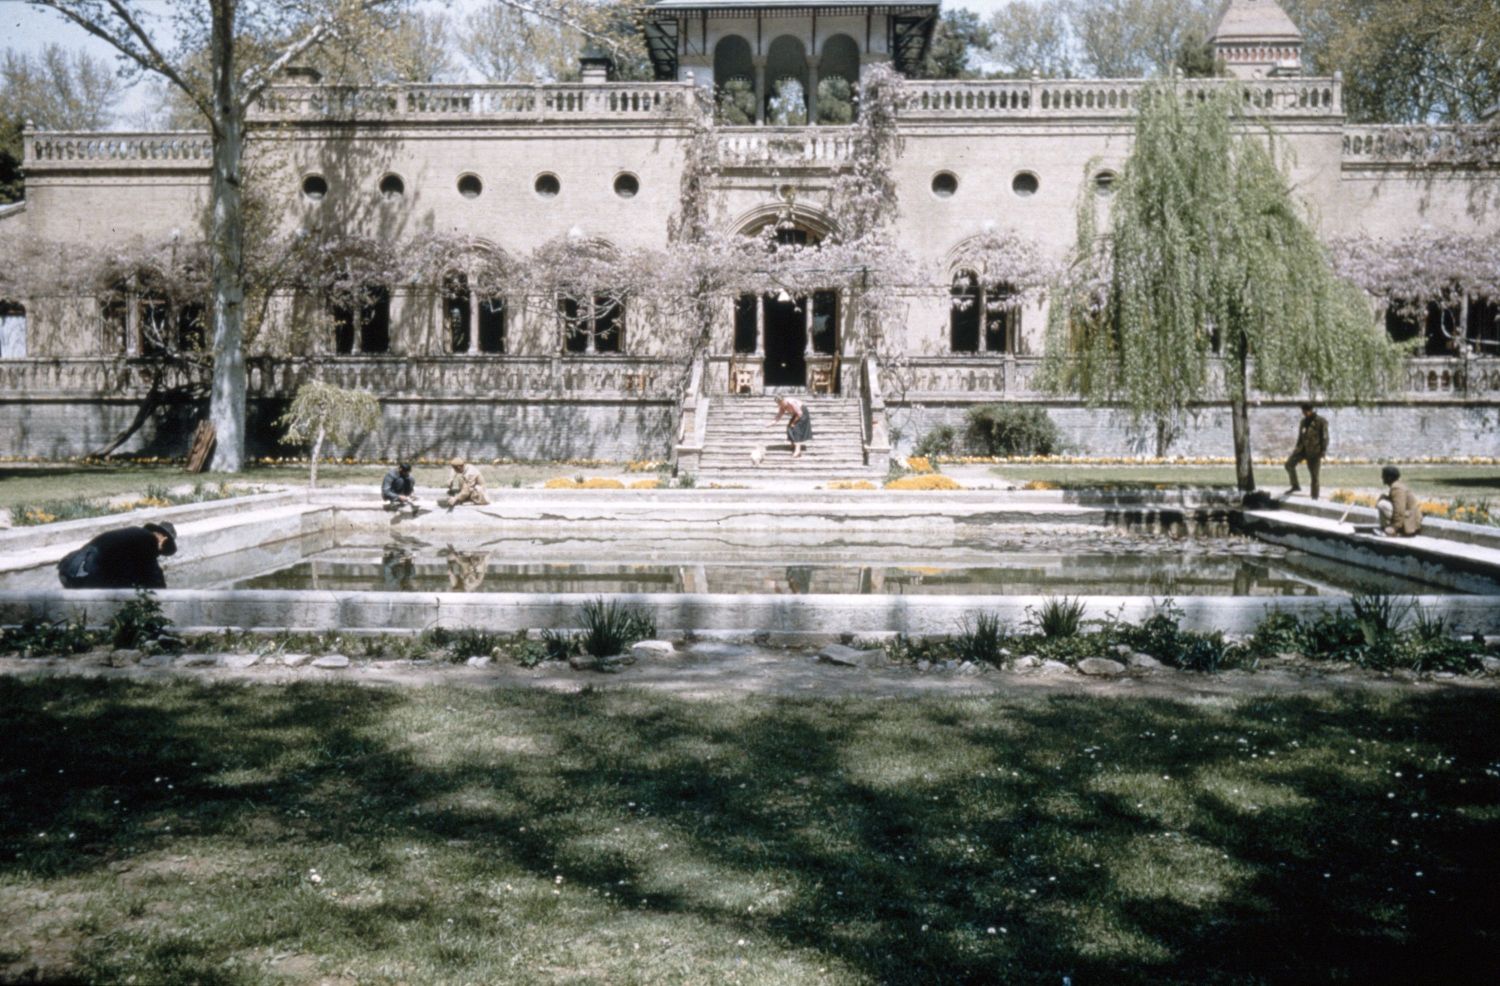 Exterior view from south, showing the main elevation with veranda and open pavilion above.